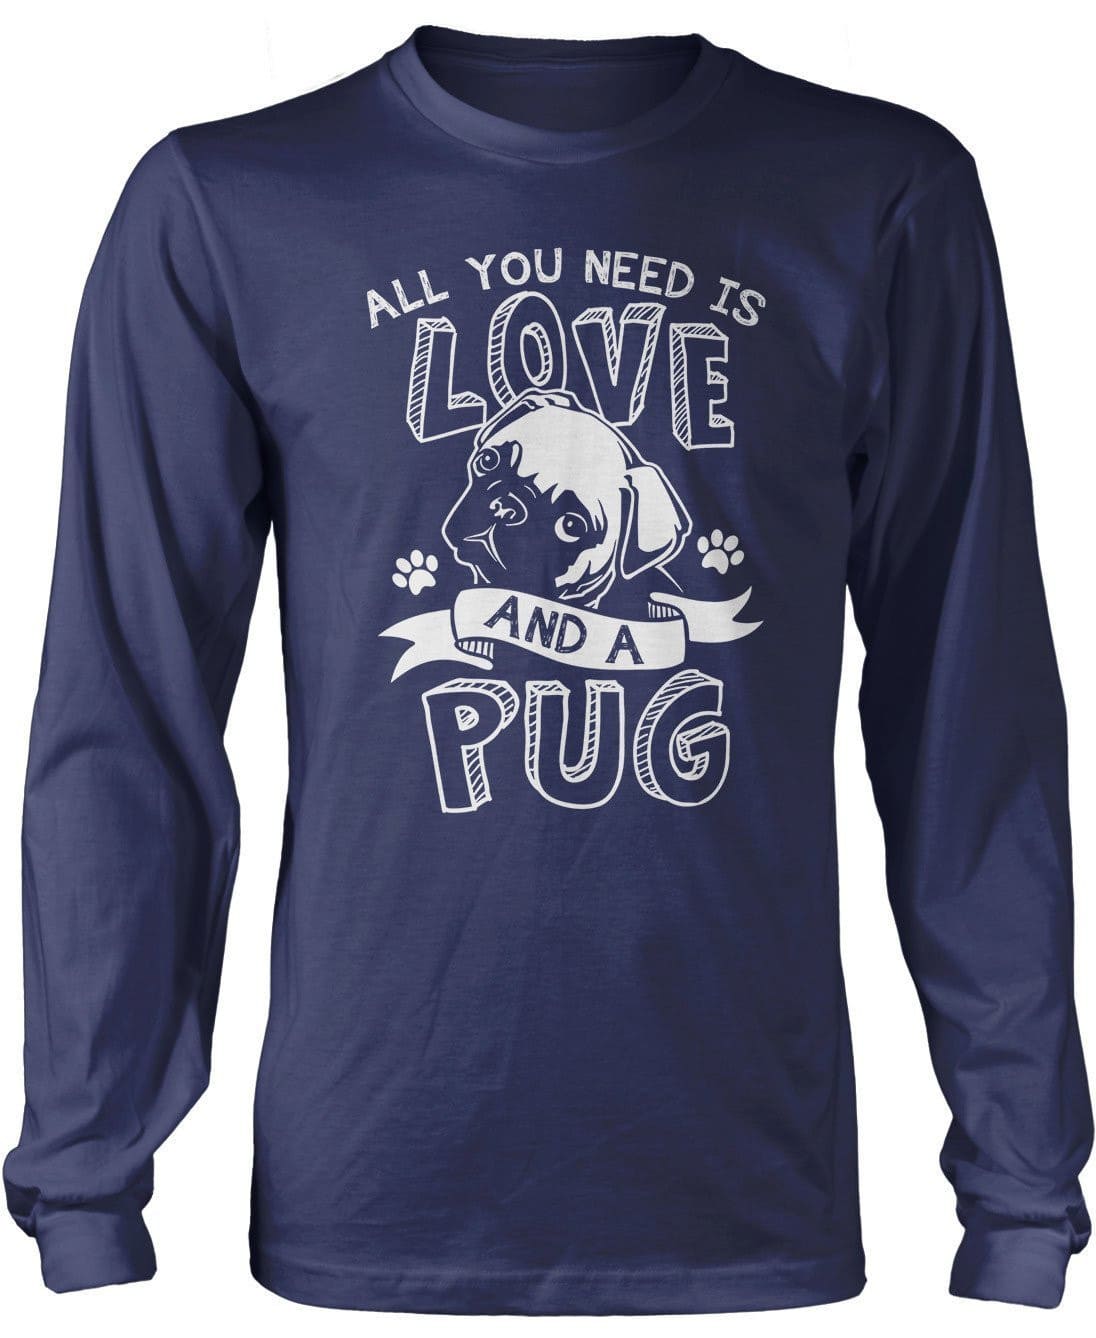 All You Need Is Love and a Pug T-Shirt